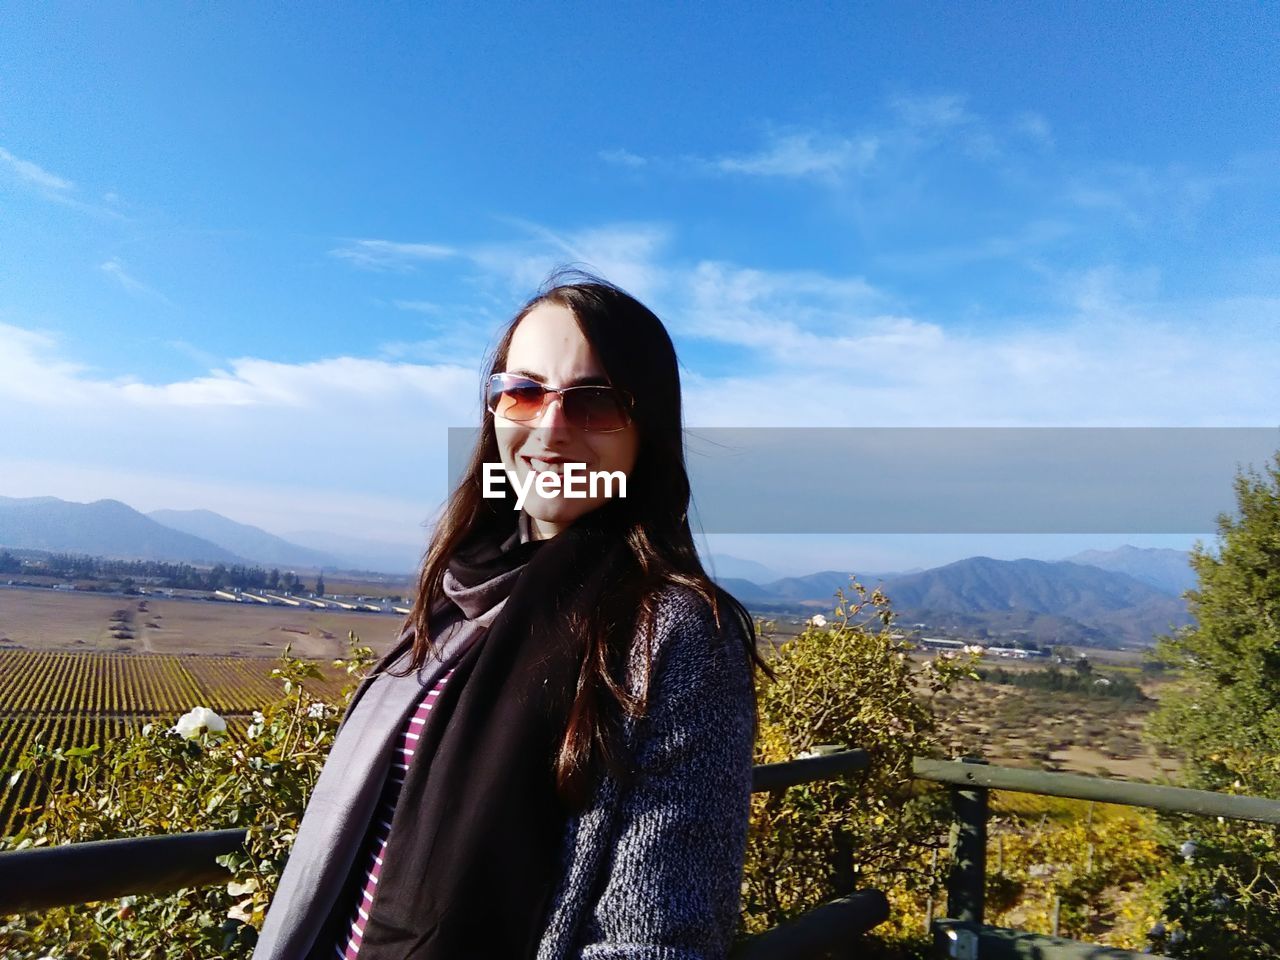 Portrait of young woman wearing sunglasses standing against mountain